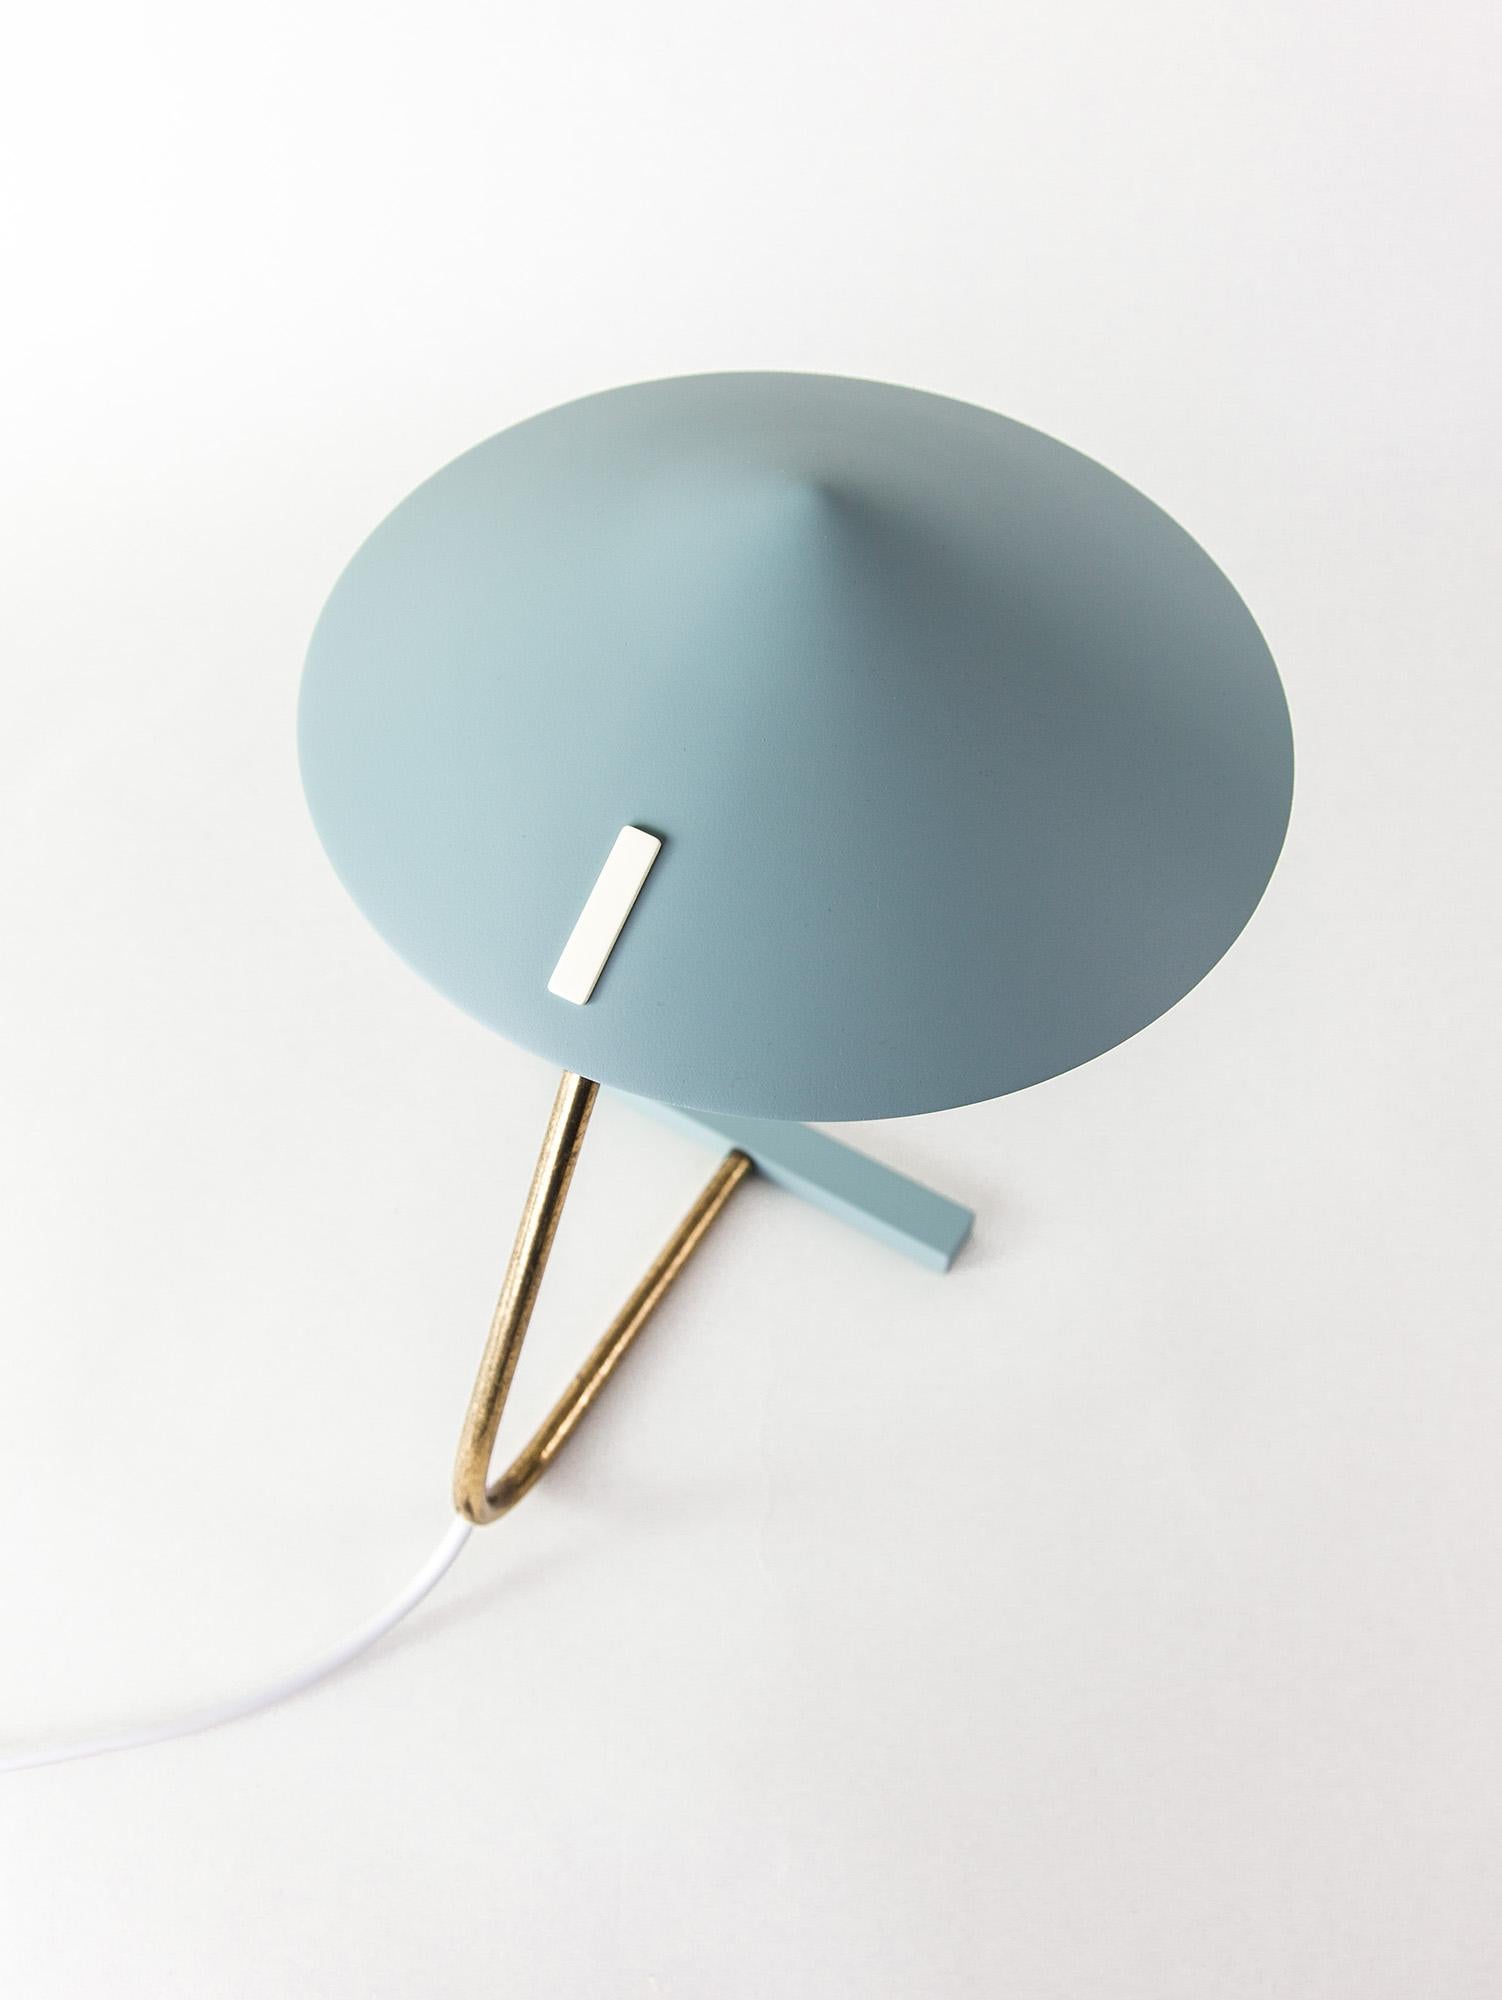 Stilux Milano Modernist Table Lamp, Italy, 1950s  For Sale 3